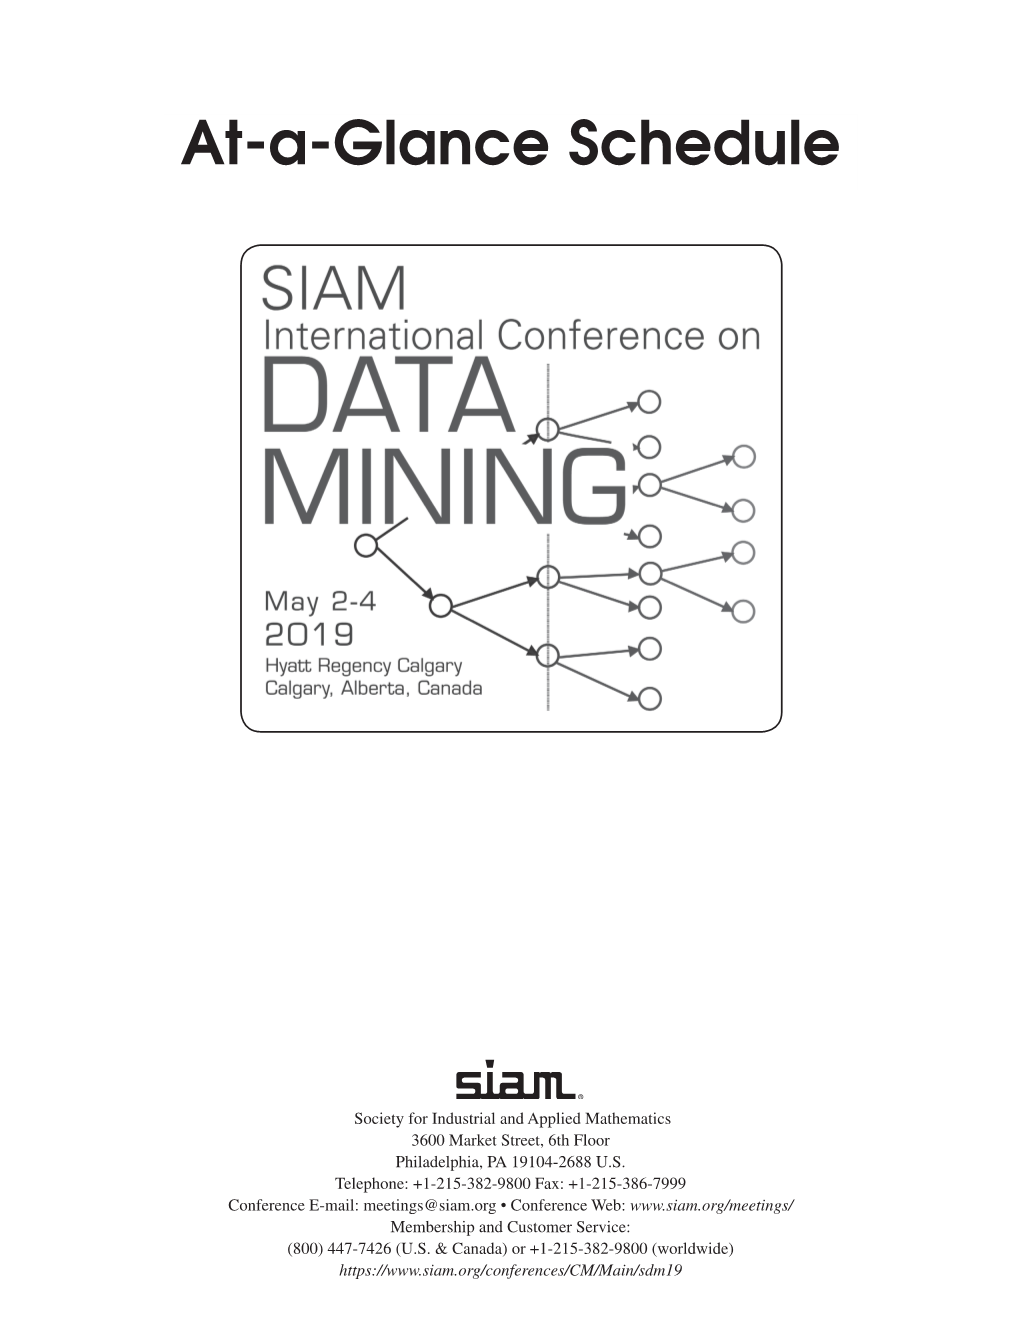 At-A-Glance Schedule